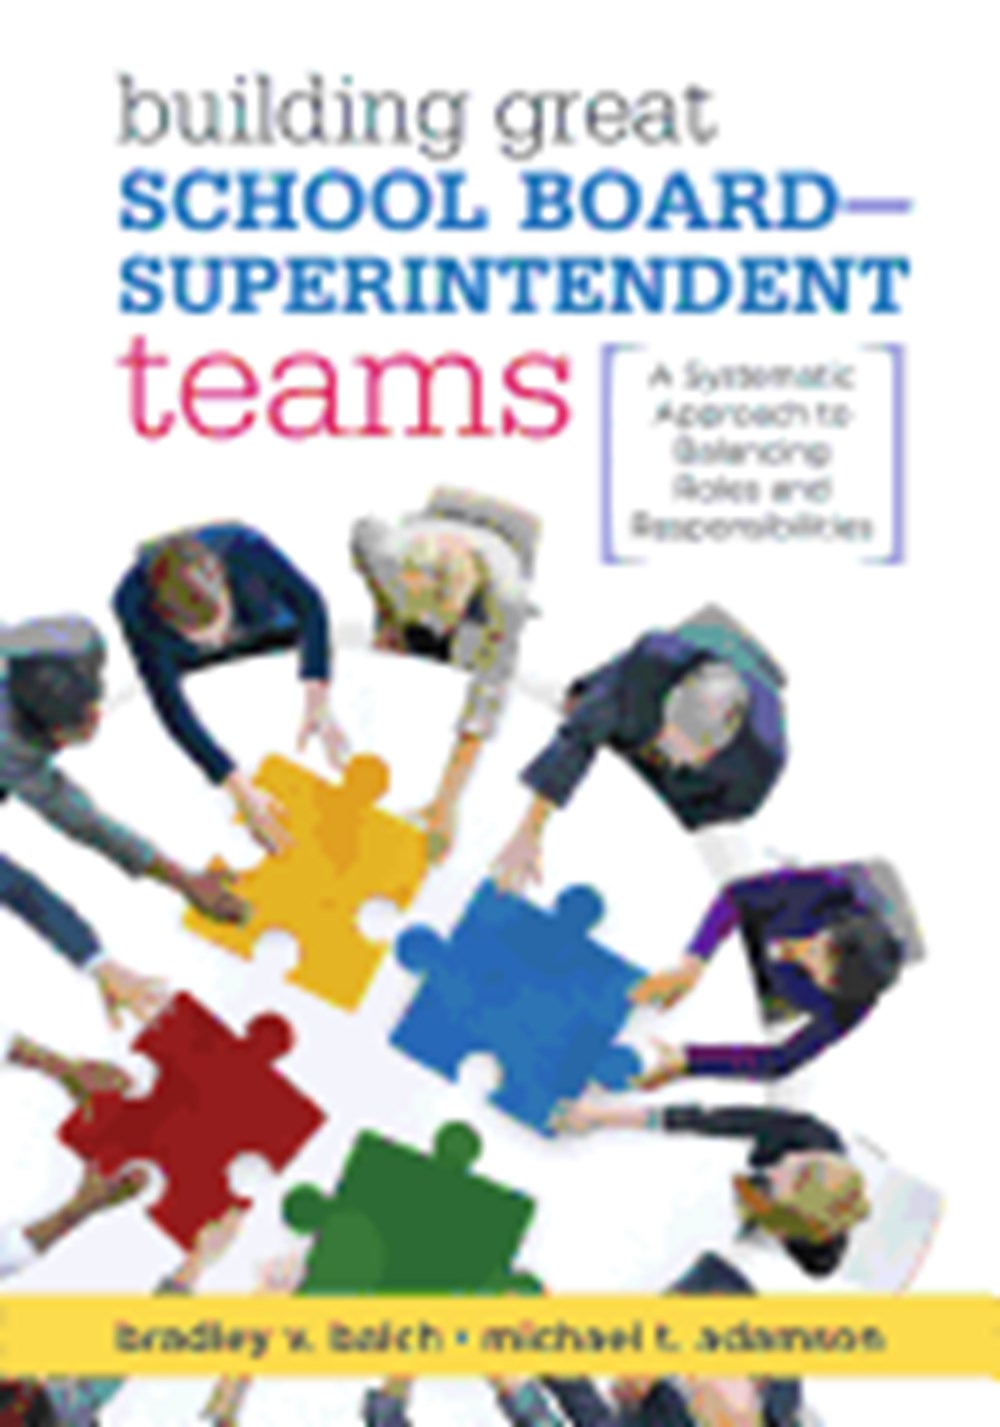 Building Great School Board -- Superintendent Teams: A Systematic Approach to Balancing Roles and Re